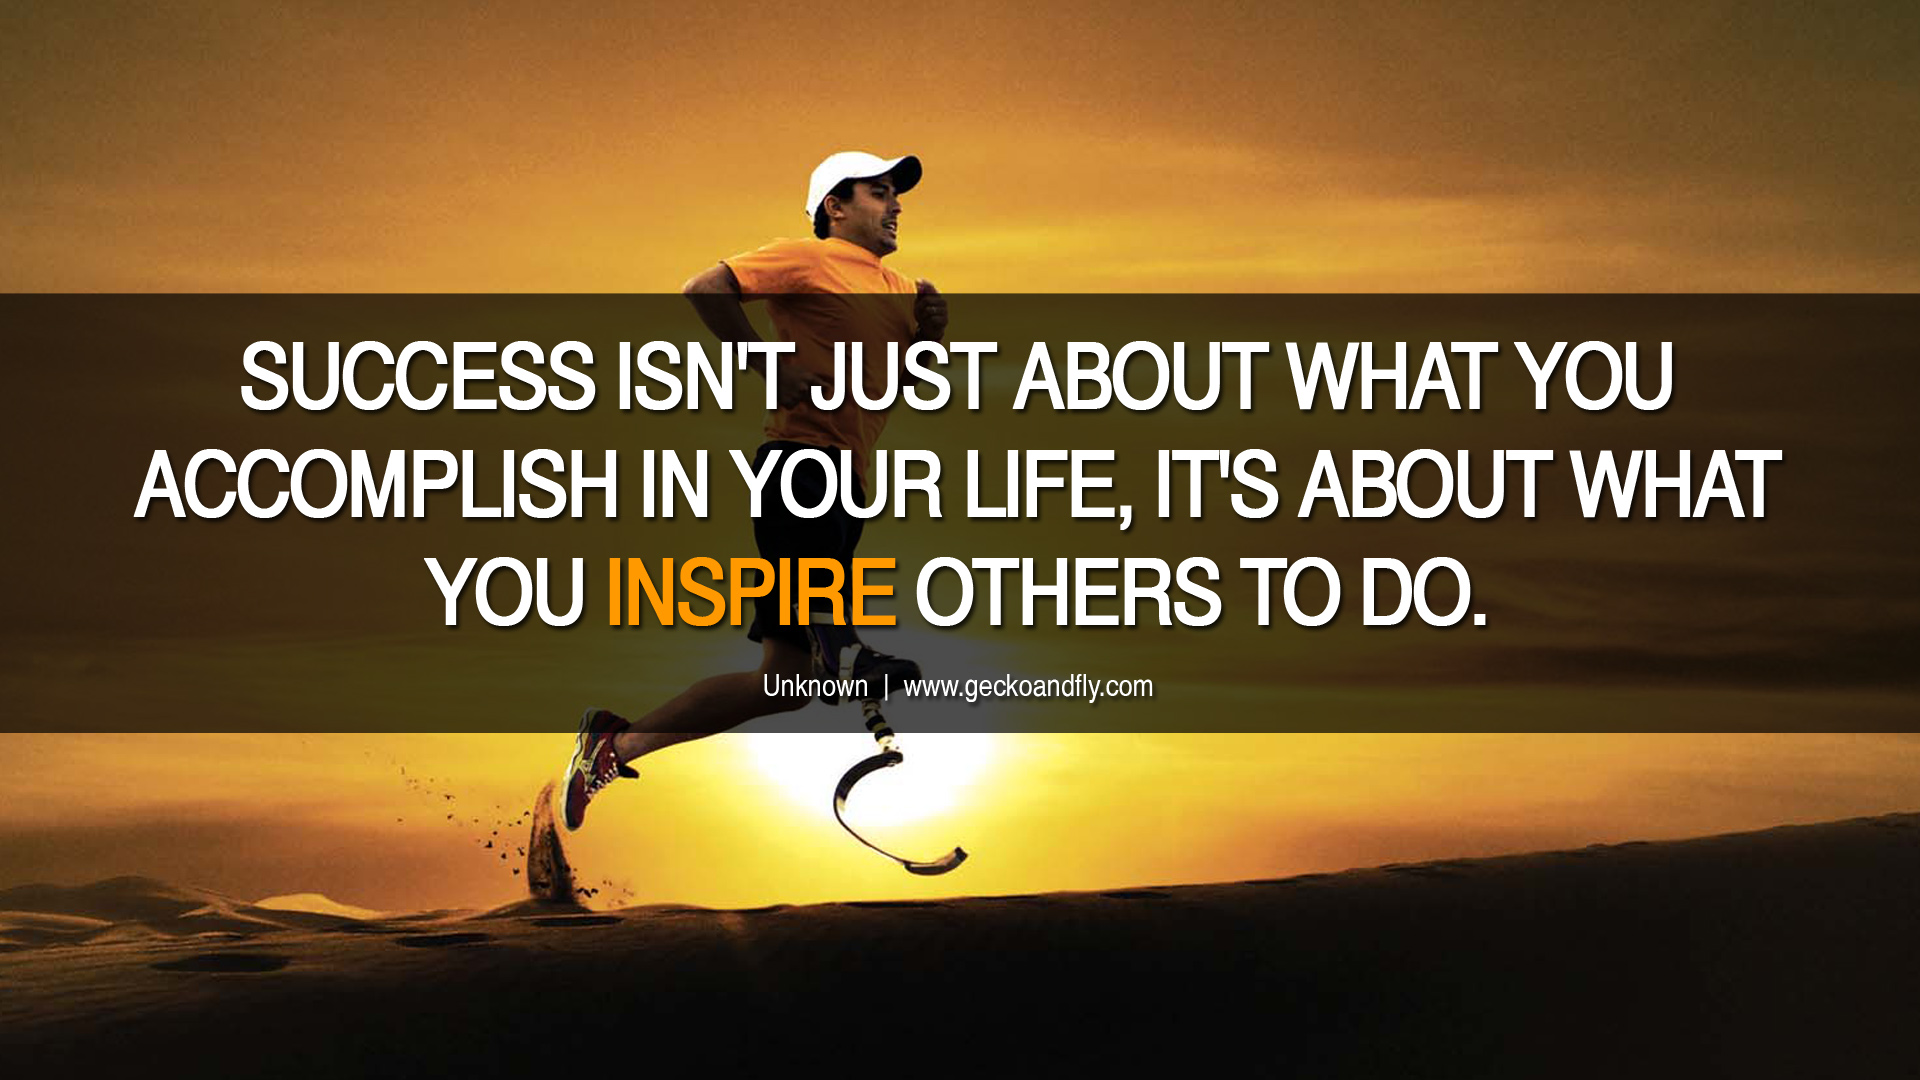 success - Quotes and Icons Photo (38584670) - Fanpop